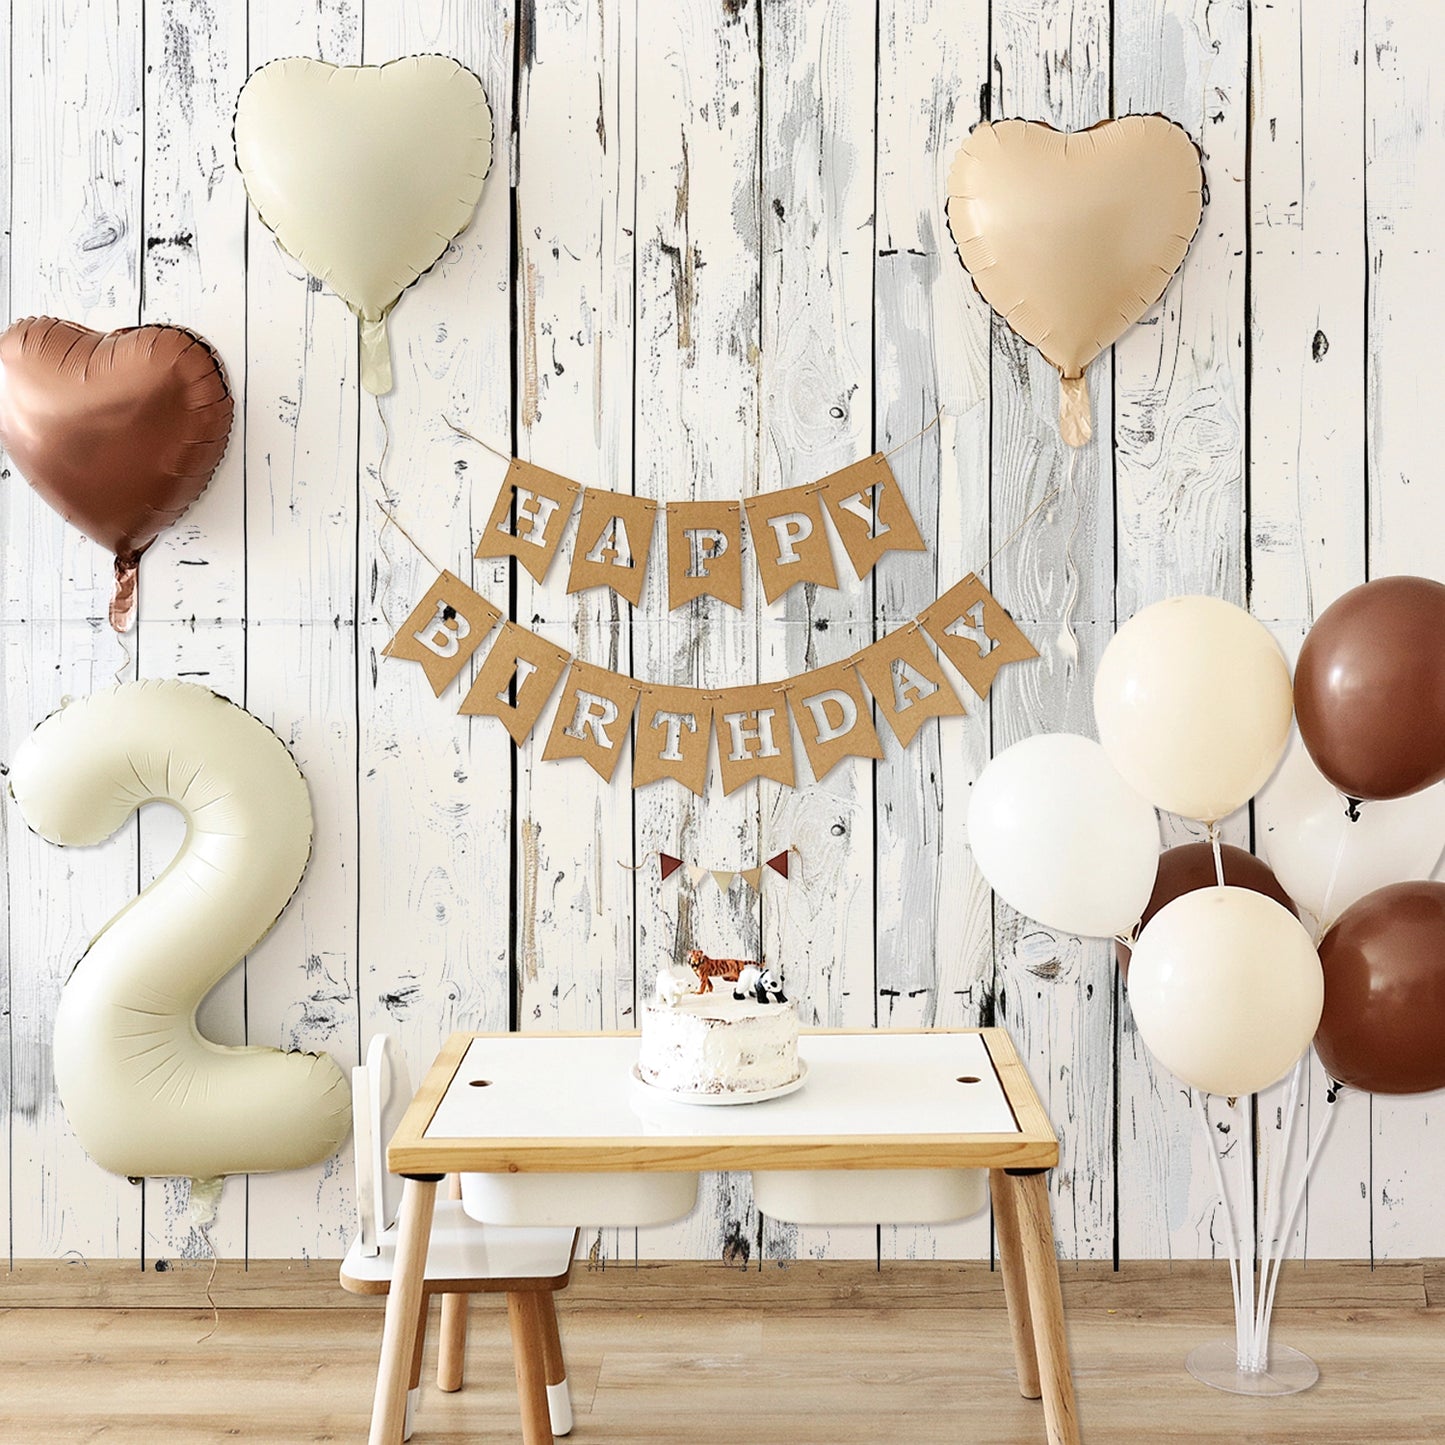 A birthday setup with heart-shaped balloons, a large number 2 balloon, a cake on a small table, and a "Happy Birthday" banner against an ideasbackdrop Wood Backdrop Retro Rustic White Gray Wooden Floor Background for Photography Kids Photo Booth Video Shoot Studio Prop.